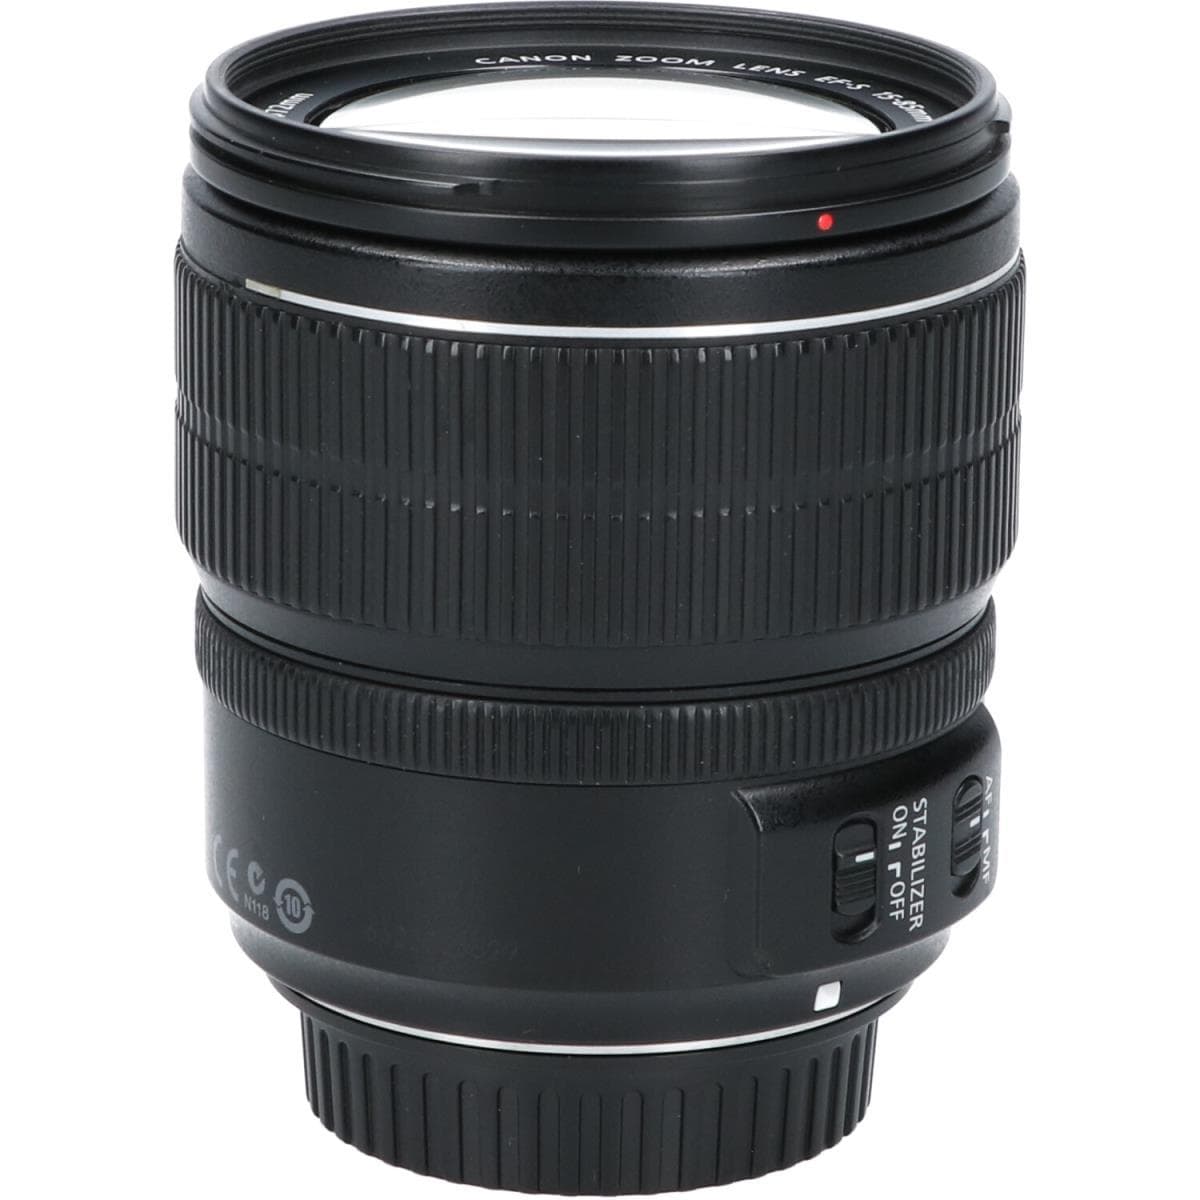 CANON EF-S15-85mm F3.5-5.6 IS USM